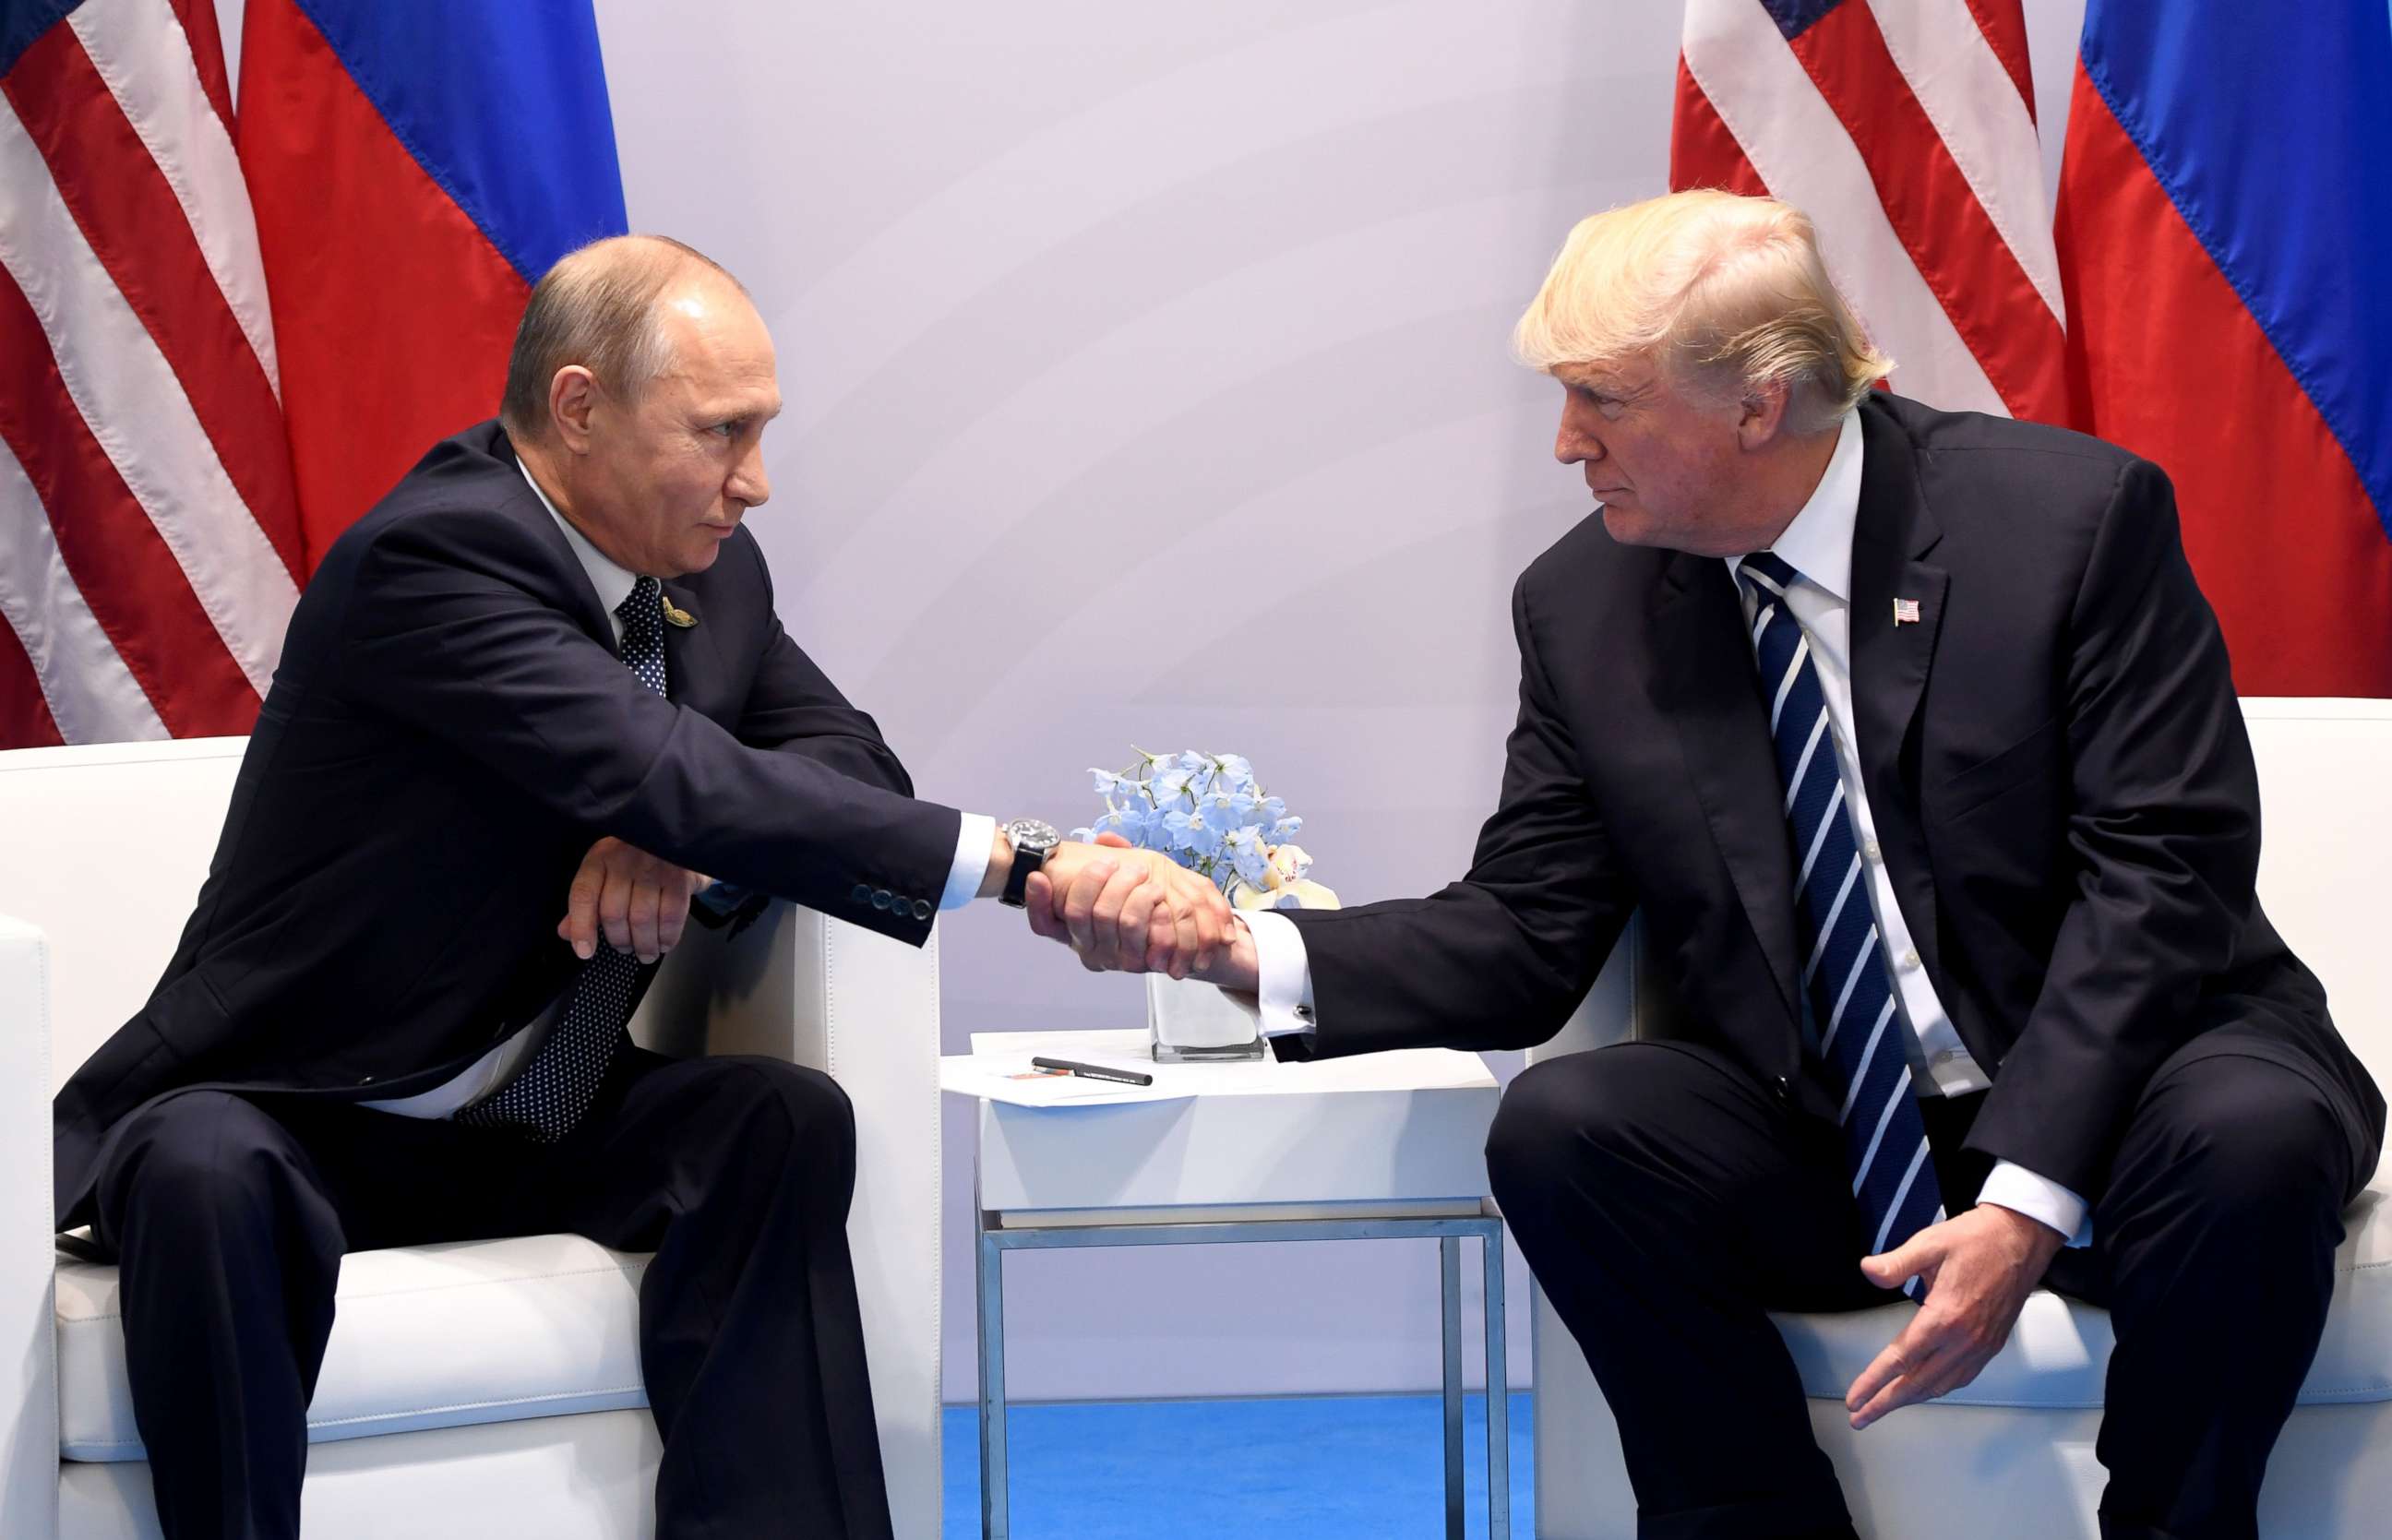 PHOTO: President Donald Trump and Russia's President Vladimir Putin shake hands during a meeting on the sidelines of the G20 Summit in Hamburg, July 7, 2017.